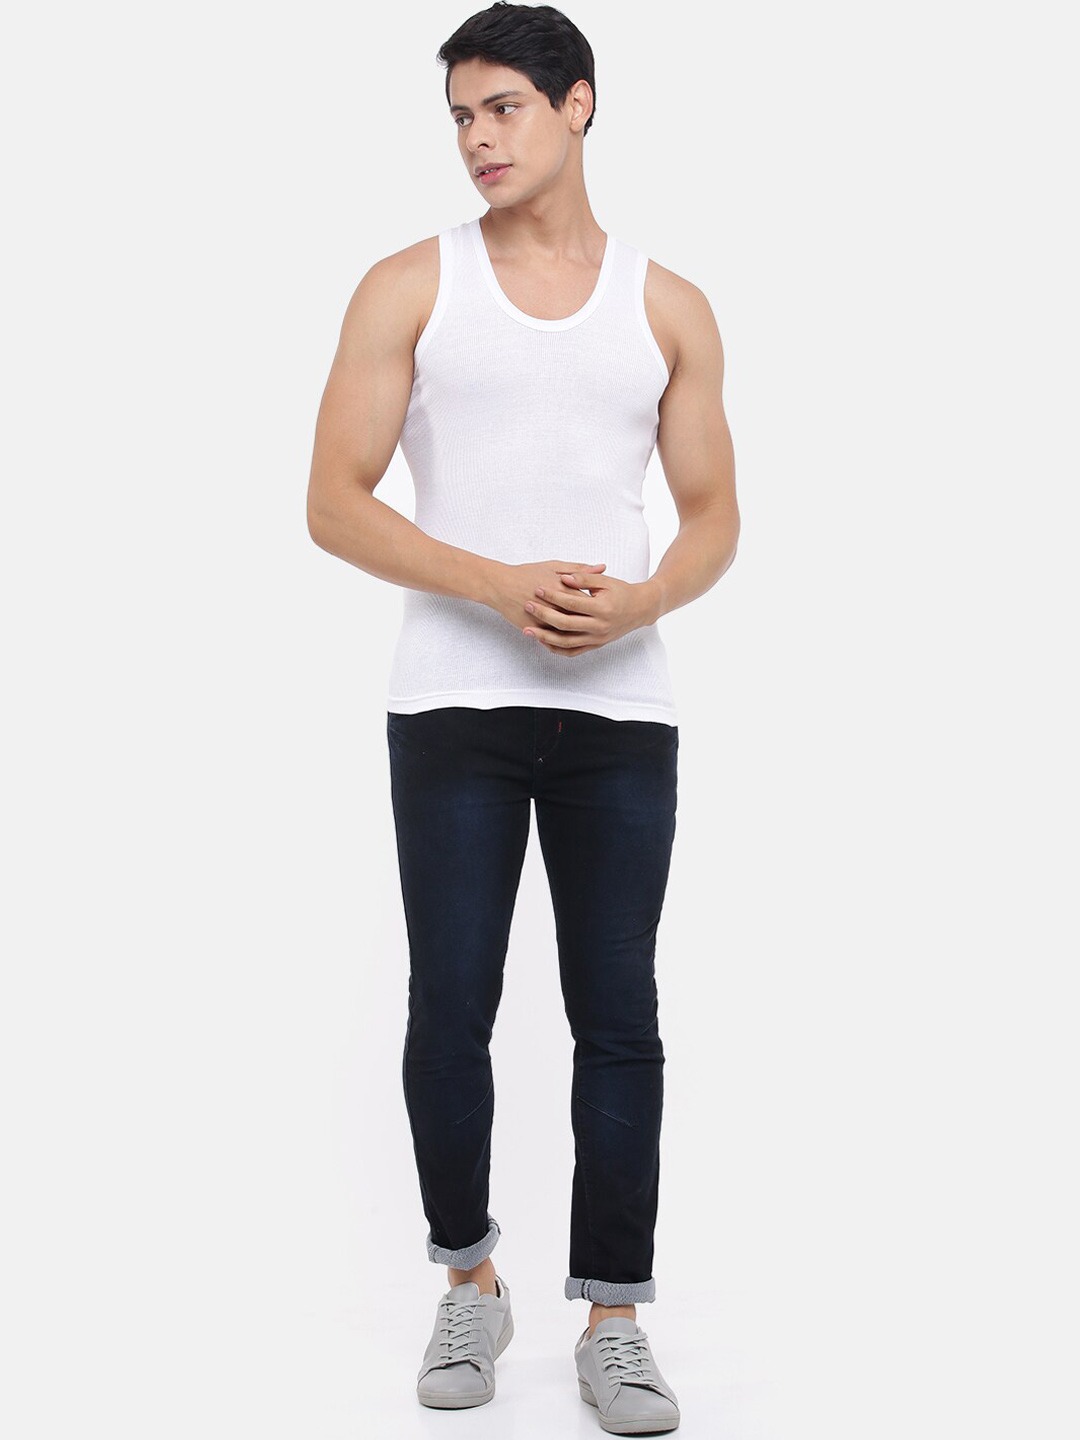 Clothing Innerwear Vests | Dollar Bigboss Men Pack Of 5 White Solid Pure Combed Cotton Basic Vests - PX70007